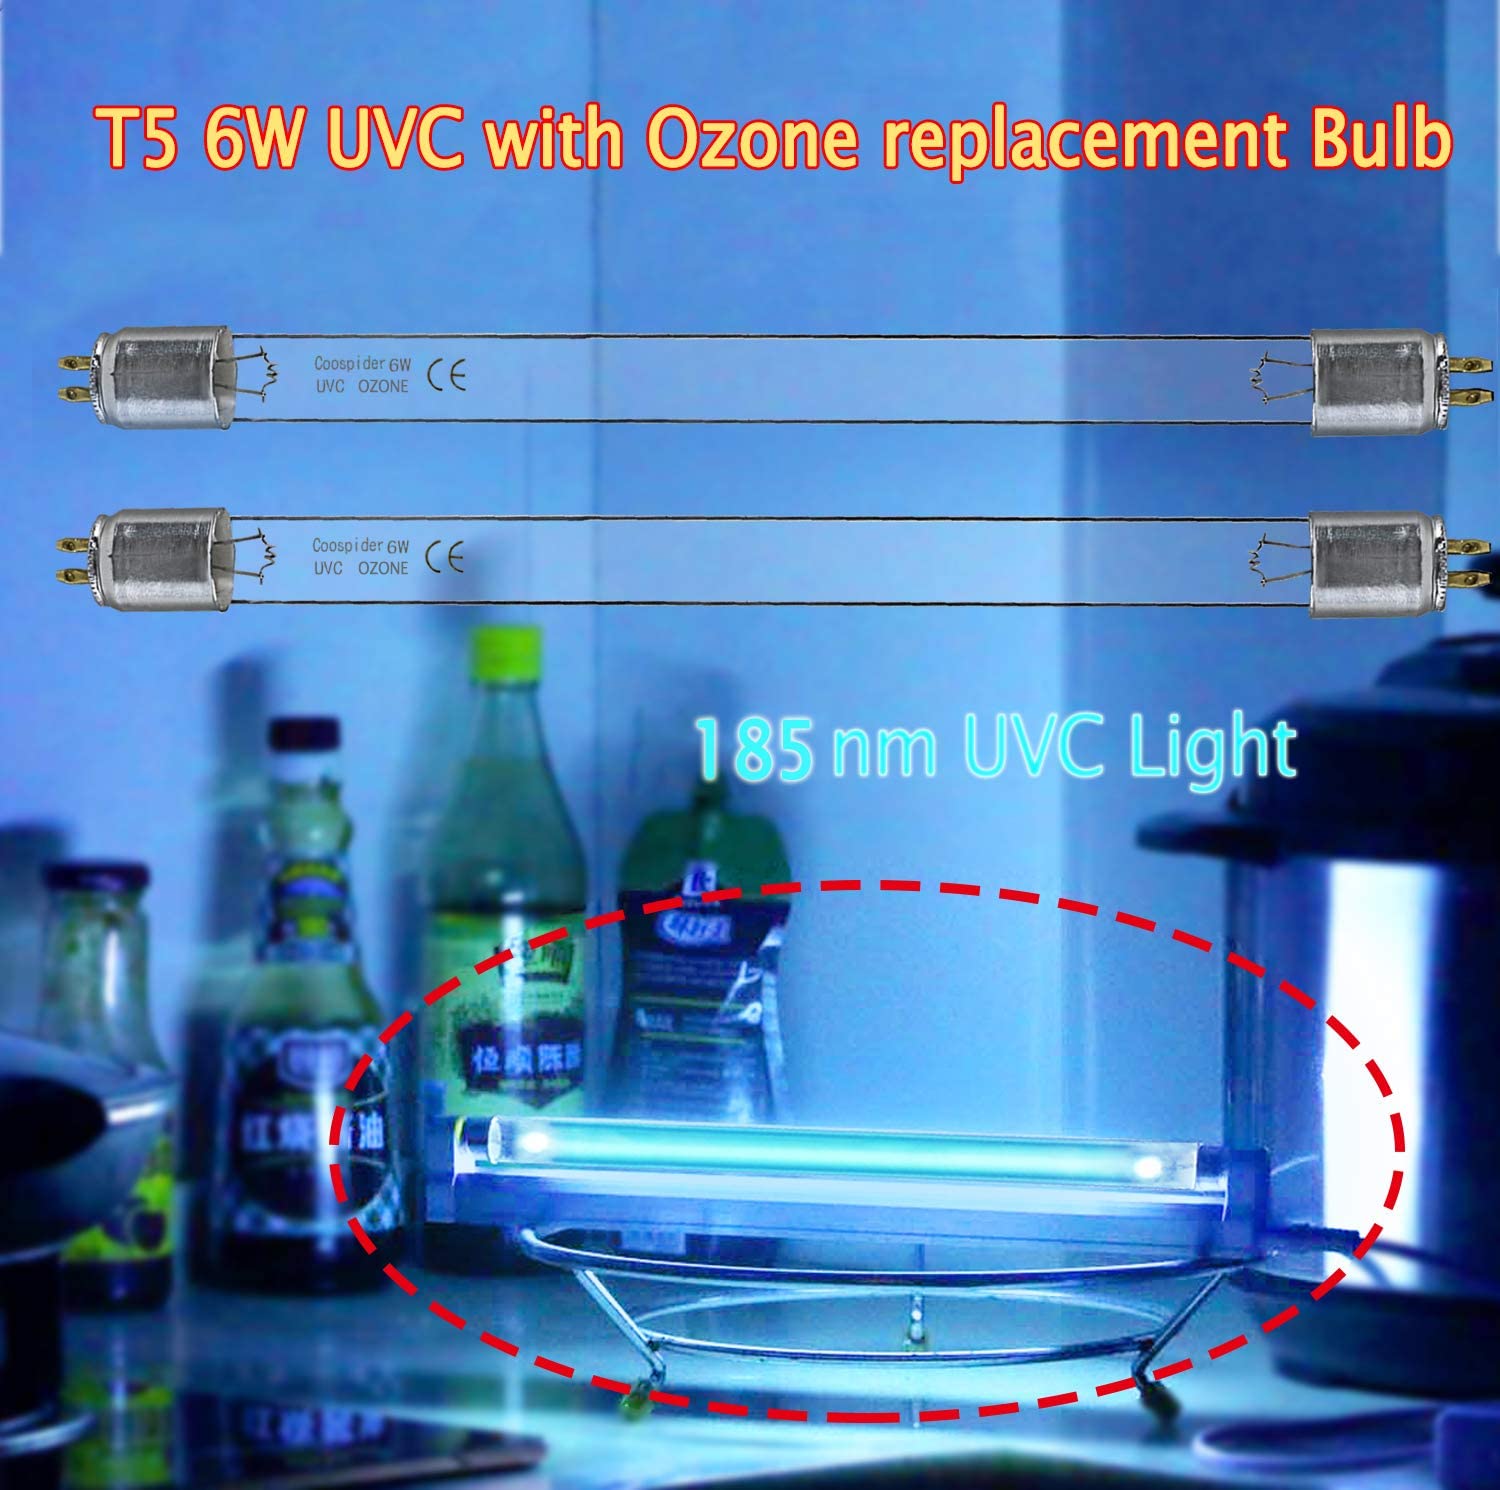 4-Pack *UV With Ozone T5 6W Bulb Replacement Light Straight Tube 